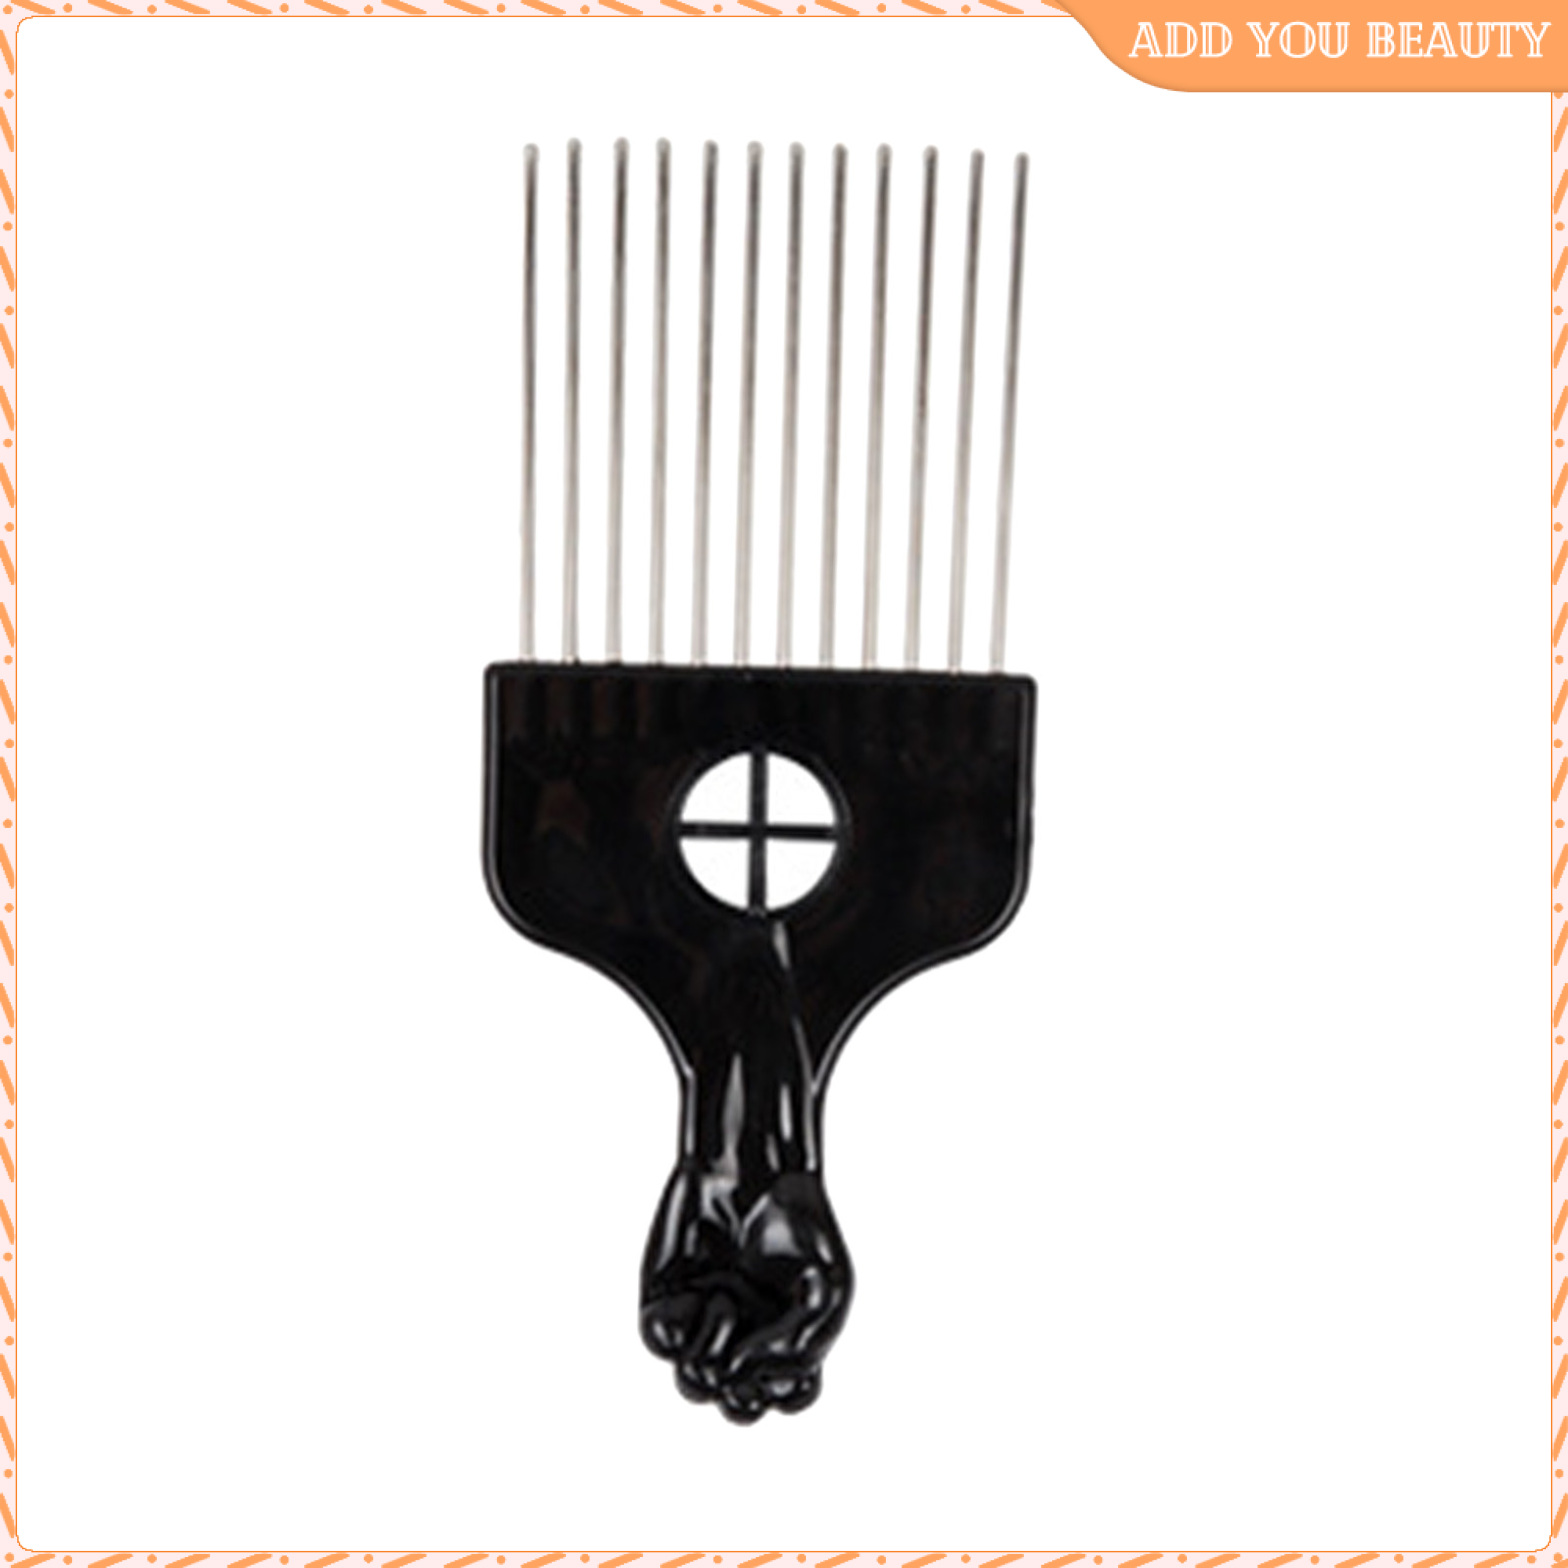 Afro Combs, Metal Afro African American Pick Comb Brush Hairdressing Tool Wig Braid Straight Hair Hair Pick Hair Styling for Home Use